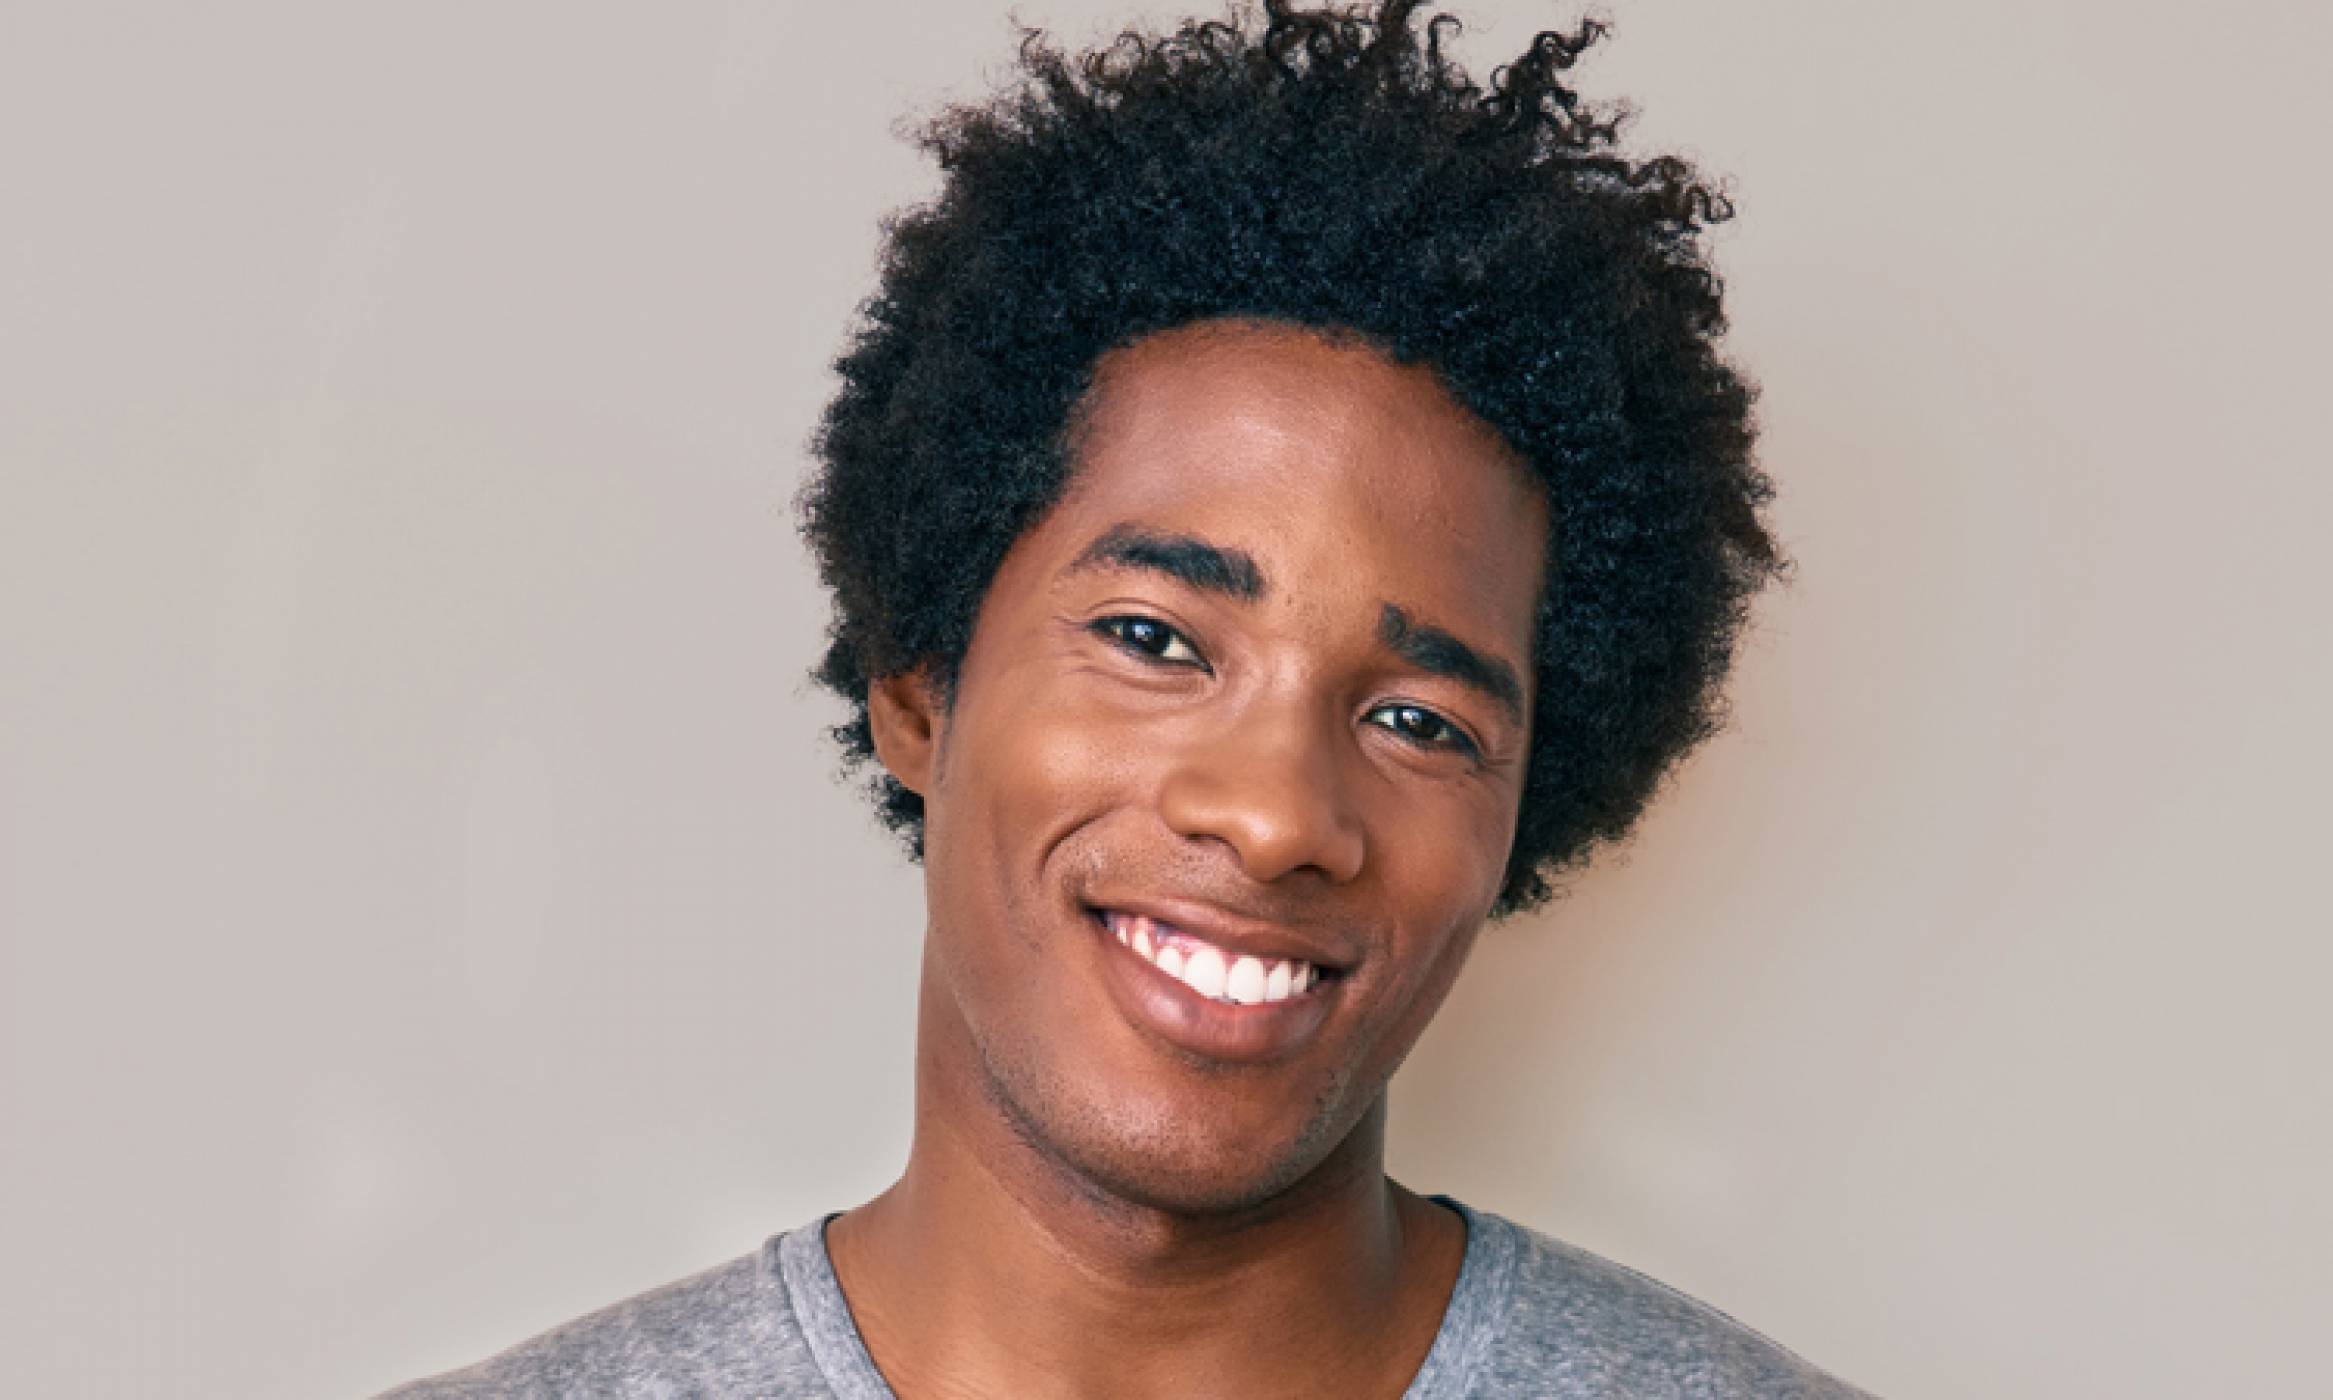 Friendly, good-looking, smiling African American man leaning against a wall with a full head of afro hair and a good hairline